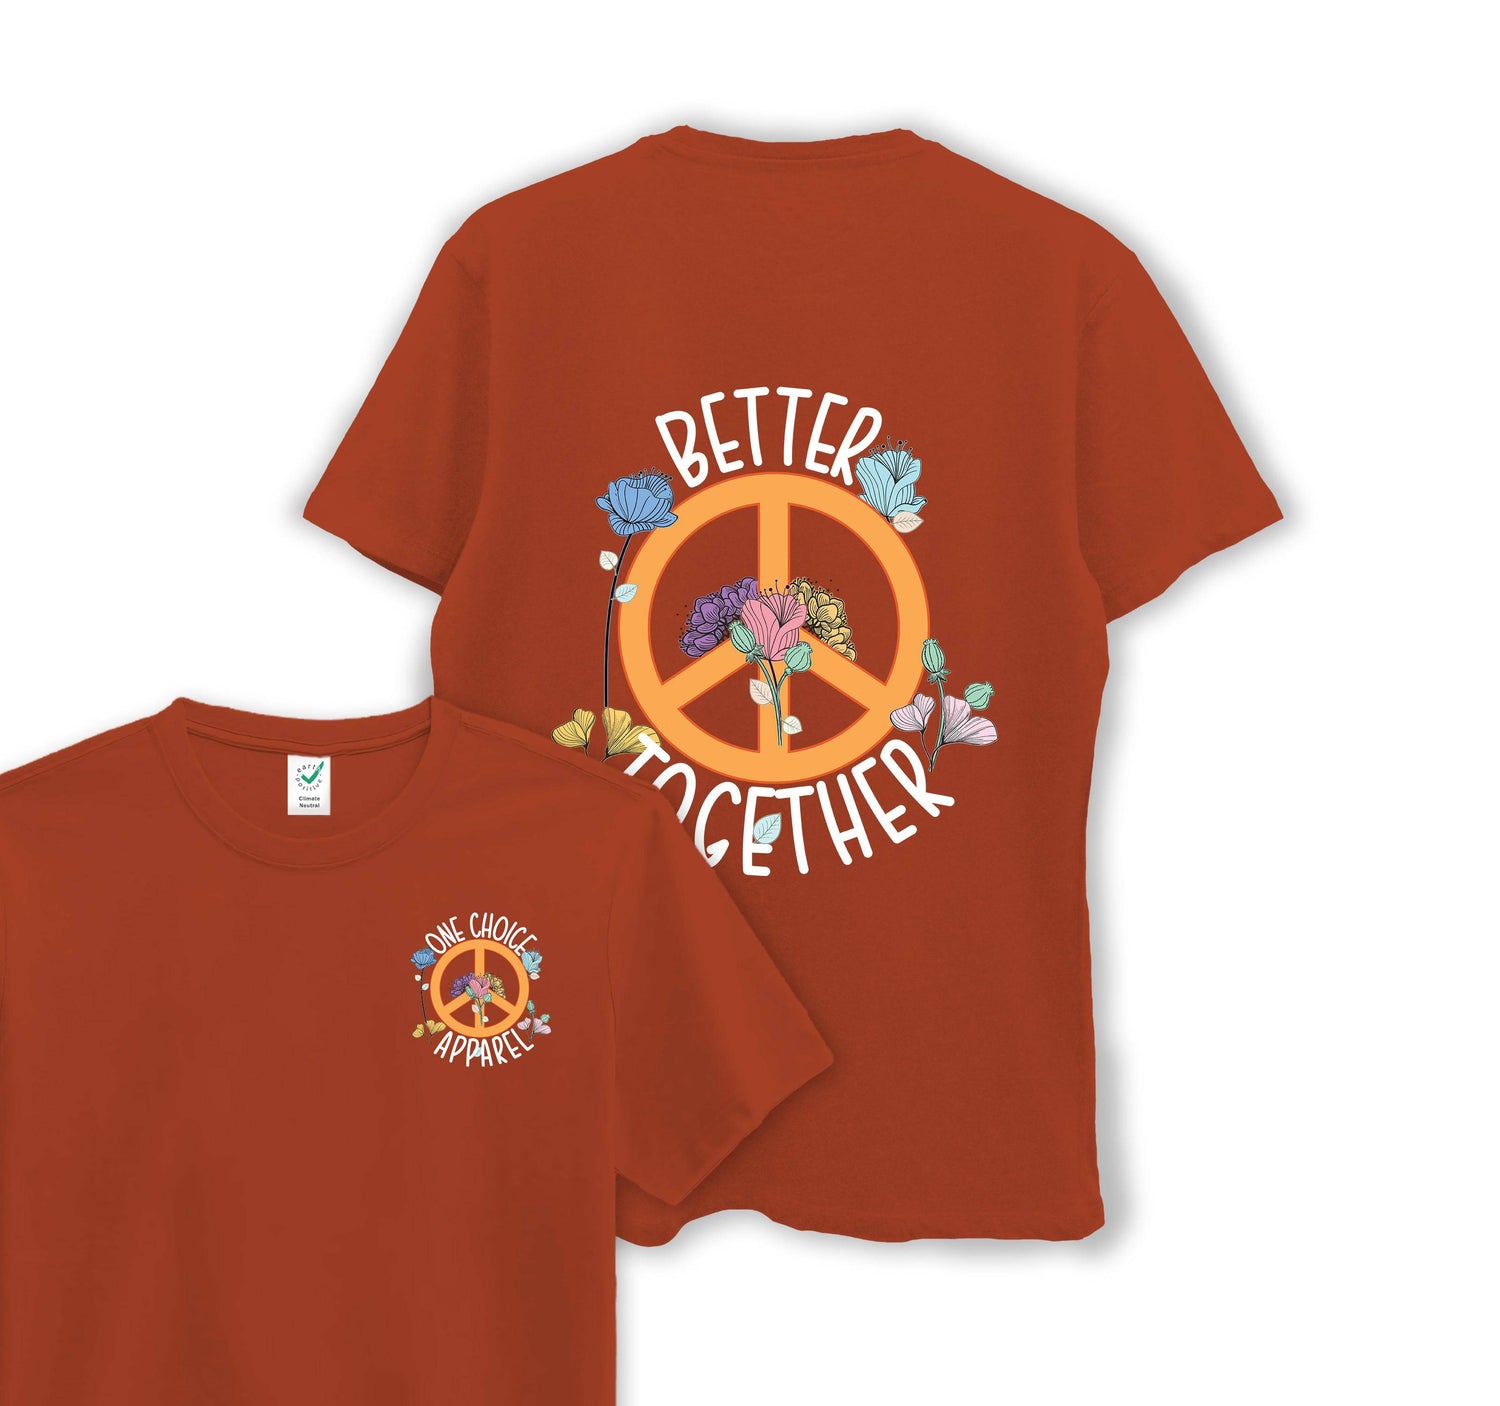 Better Together - Organic Cotton Tee - One Choice Apparel